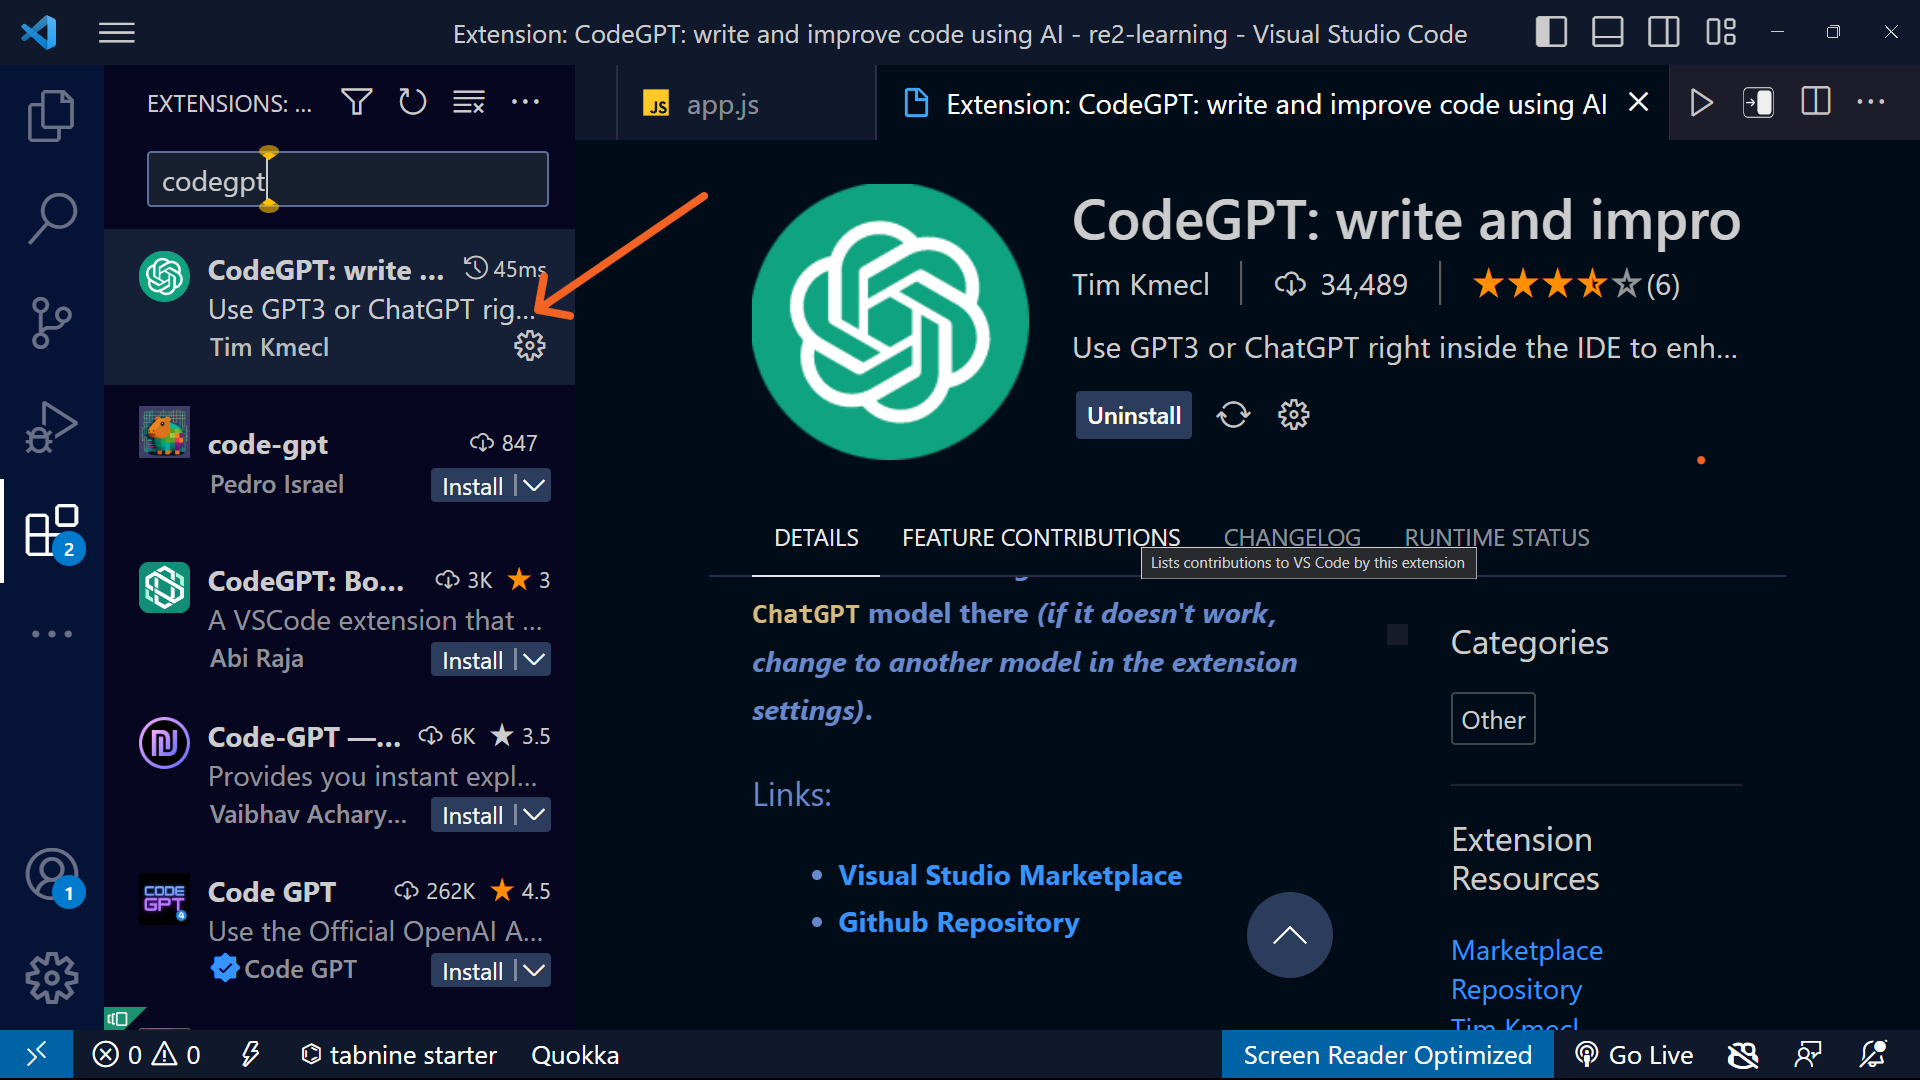 How to Install ChatGPT in VSCode